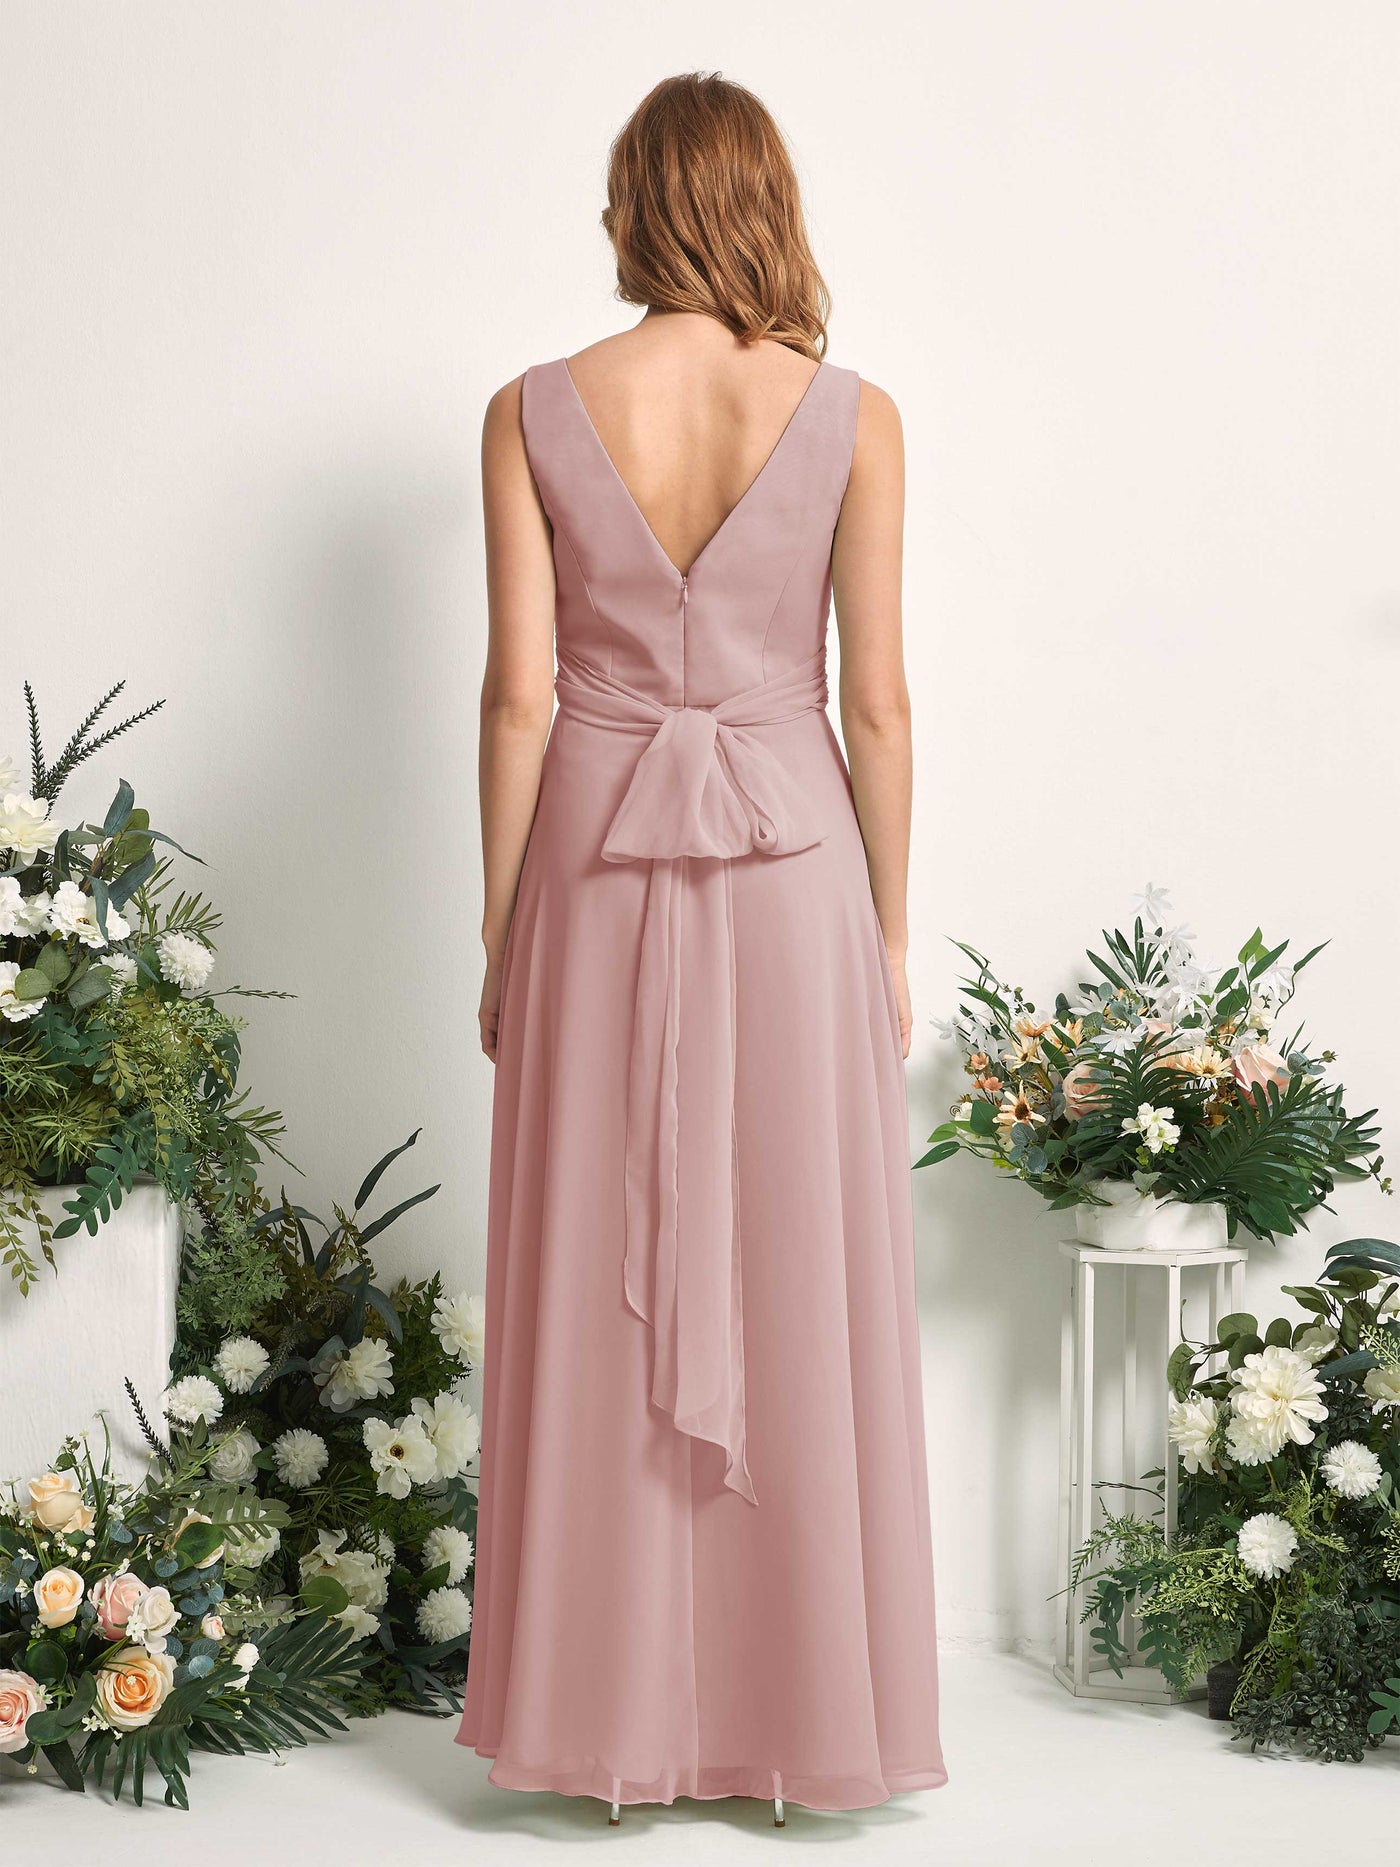 Bridesmaid Dress A-line Chiffon Straps Full Length Sleeveless Wedding Party Dress - Dusty Rose (81227309)#color_dusty-rose